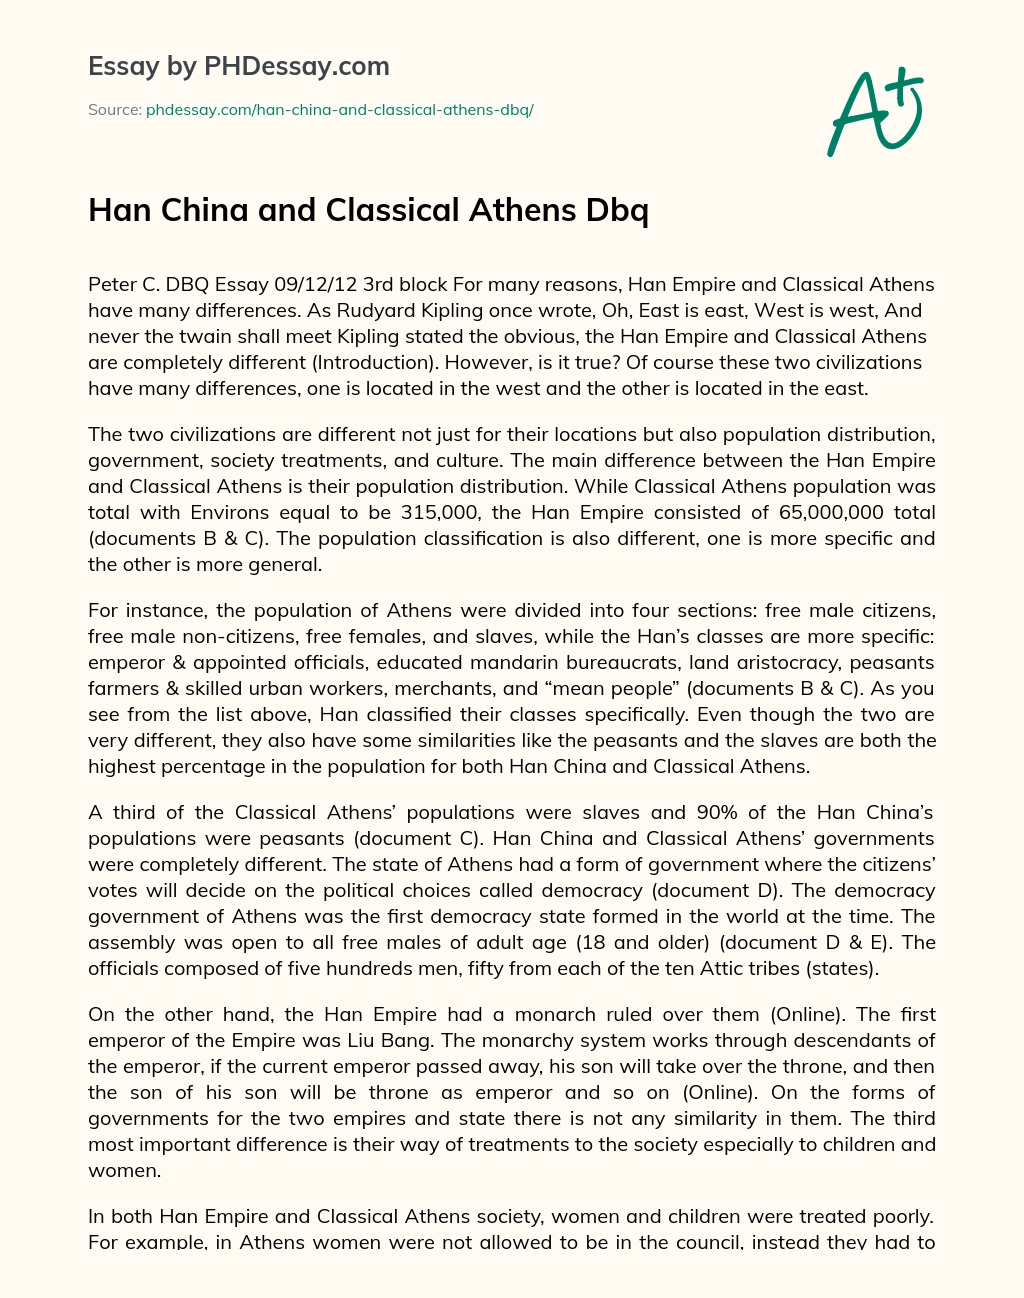 Han China and Classical Athens Dbq essay